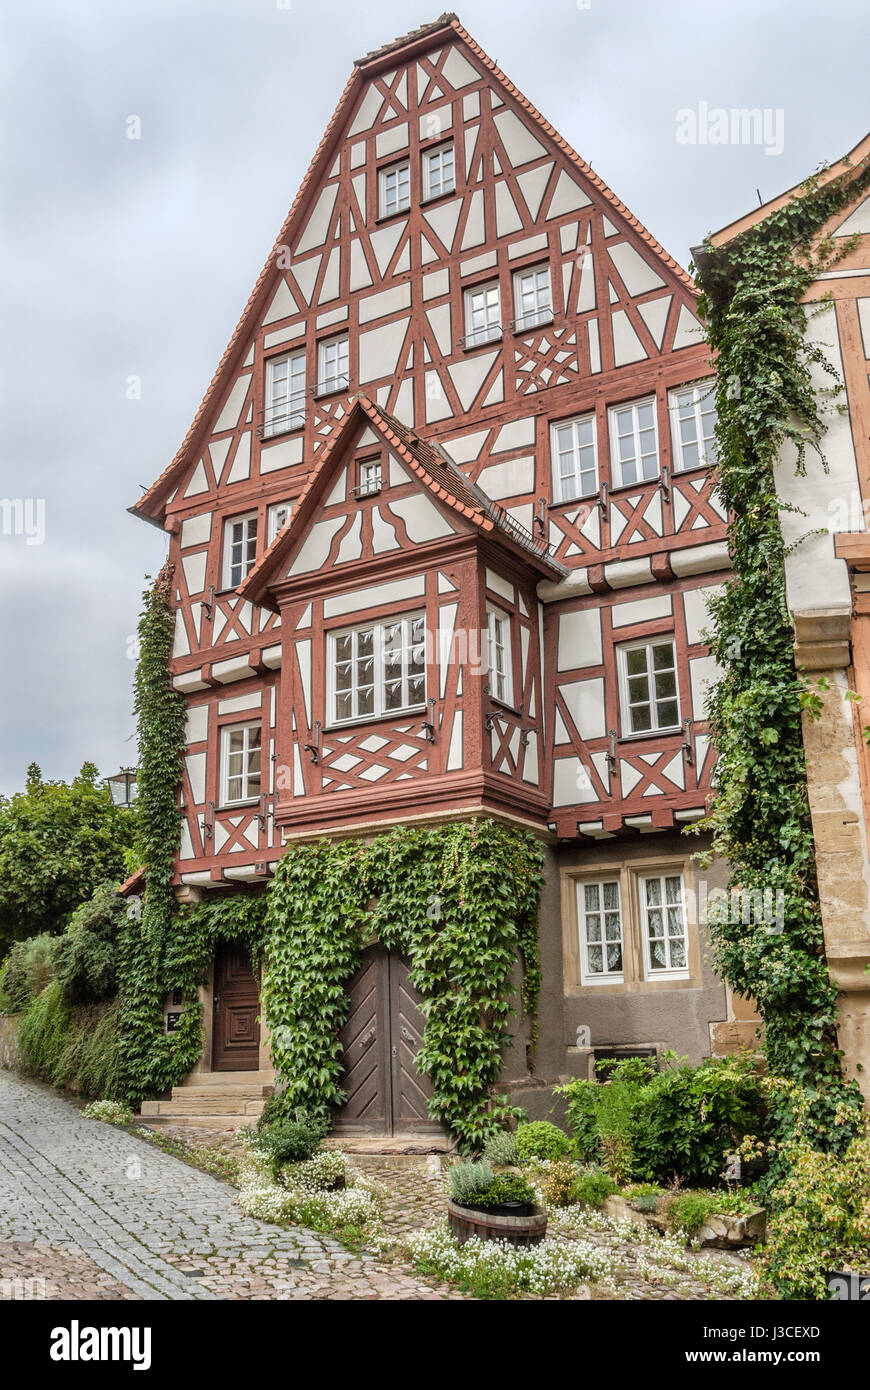 Timber Frame Houses in the medieval Town Bad Wimpfen, Baden Wuerttemberg, Southern Germany Stock Photo